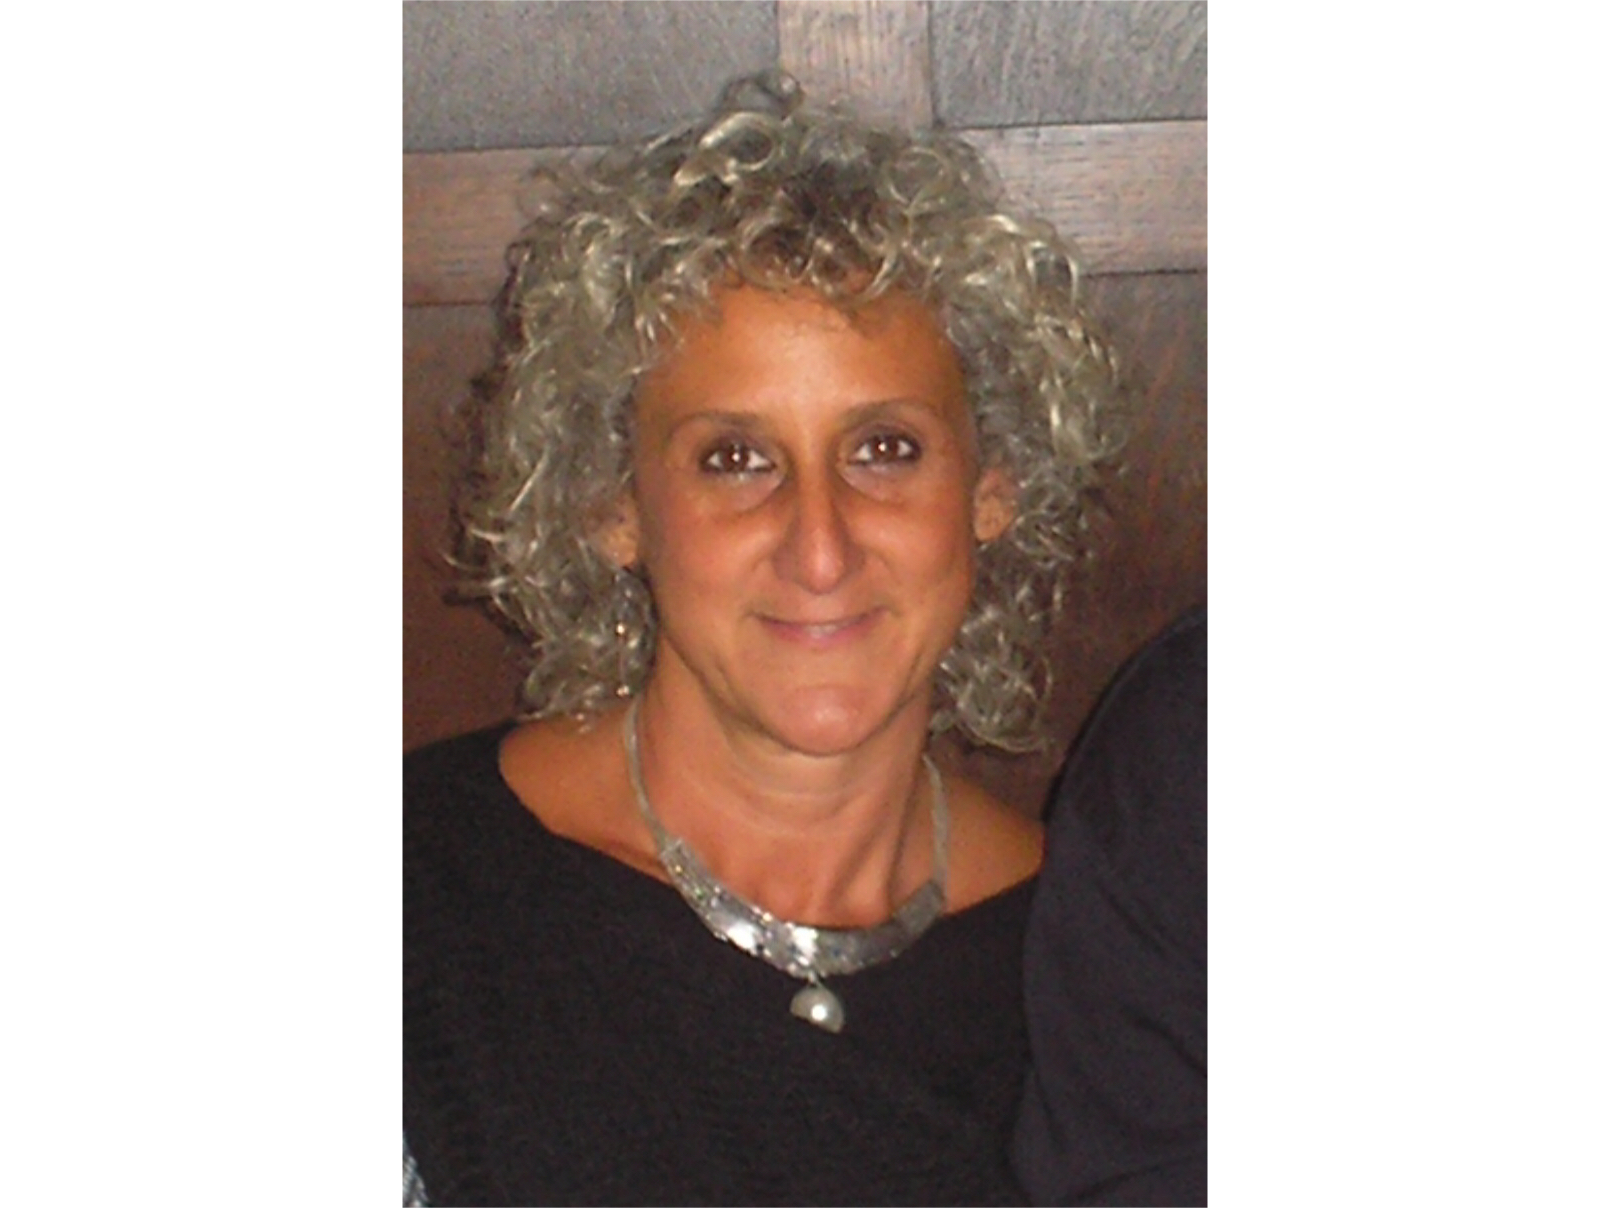 [Joyce Dalsheim: Cultural Anthropologist Researching Nationalism, Religion, and the Israel/Palestine Conflict] 